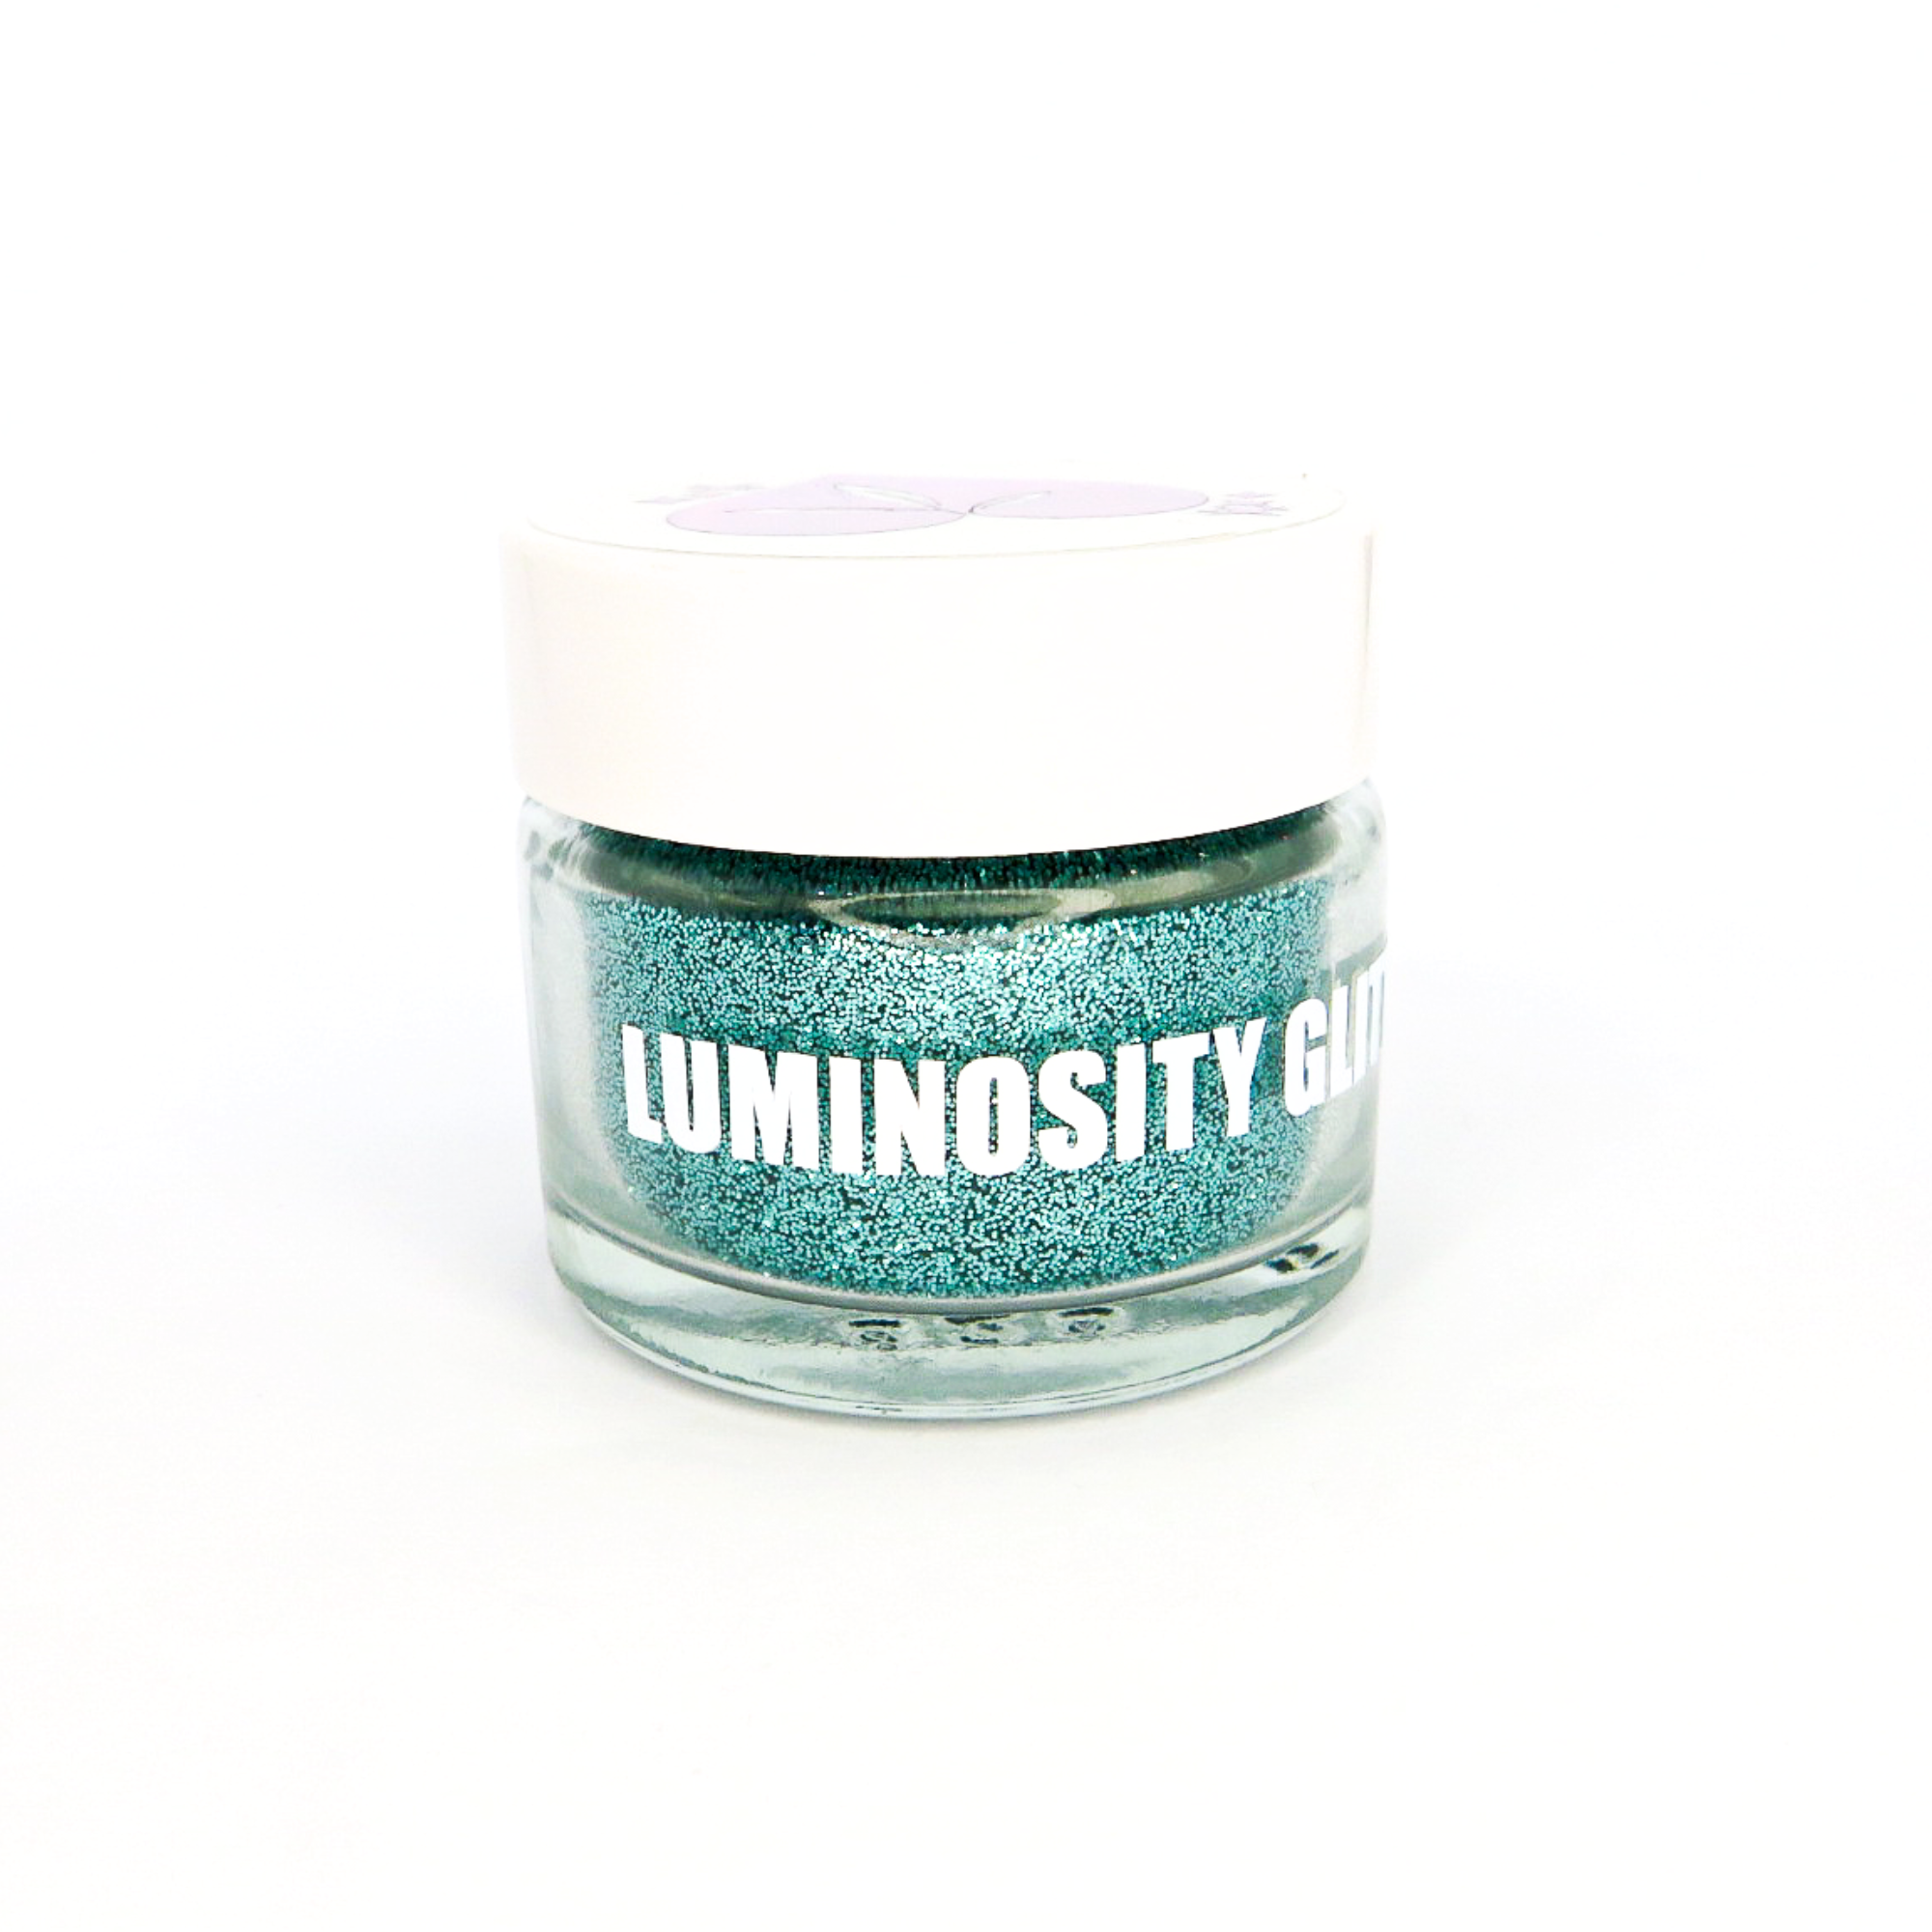 Turquoise eco stardust biodegradable cosmetic glitter for face painters, makeup artists and other creative professionals